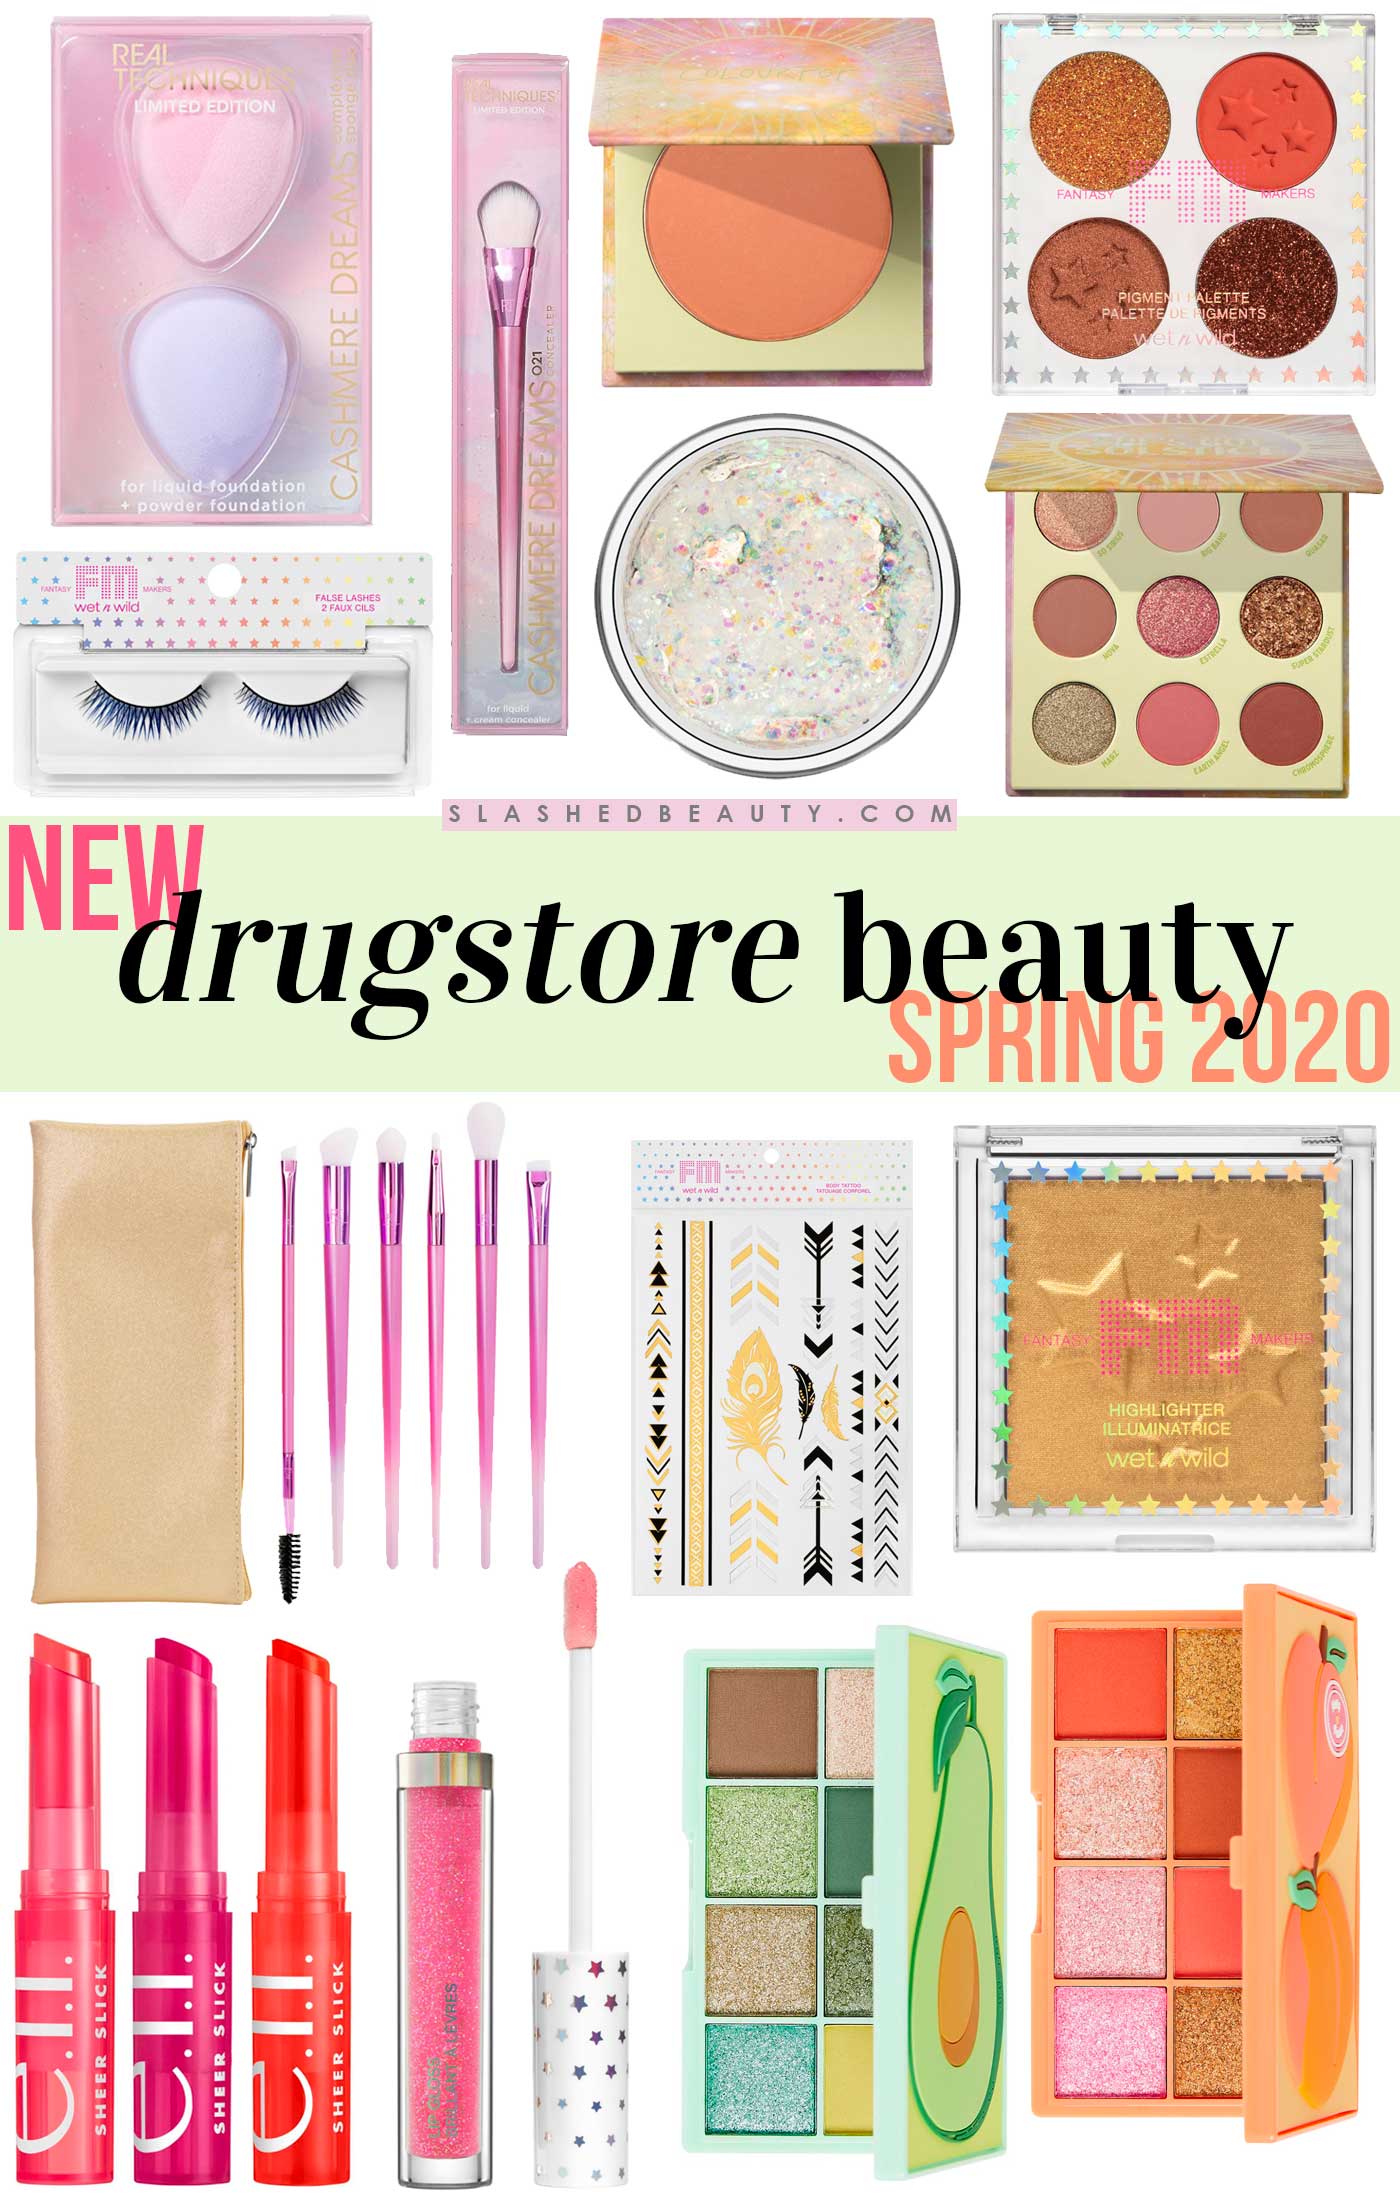 Most Exciting New Drugstore Makeup & Beauty Releases for Spring 2020 | What's New in Beauty April/May 2020 | Slashed Beauty